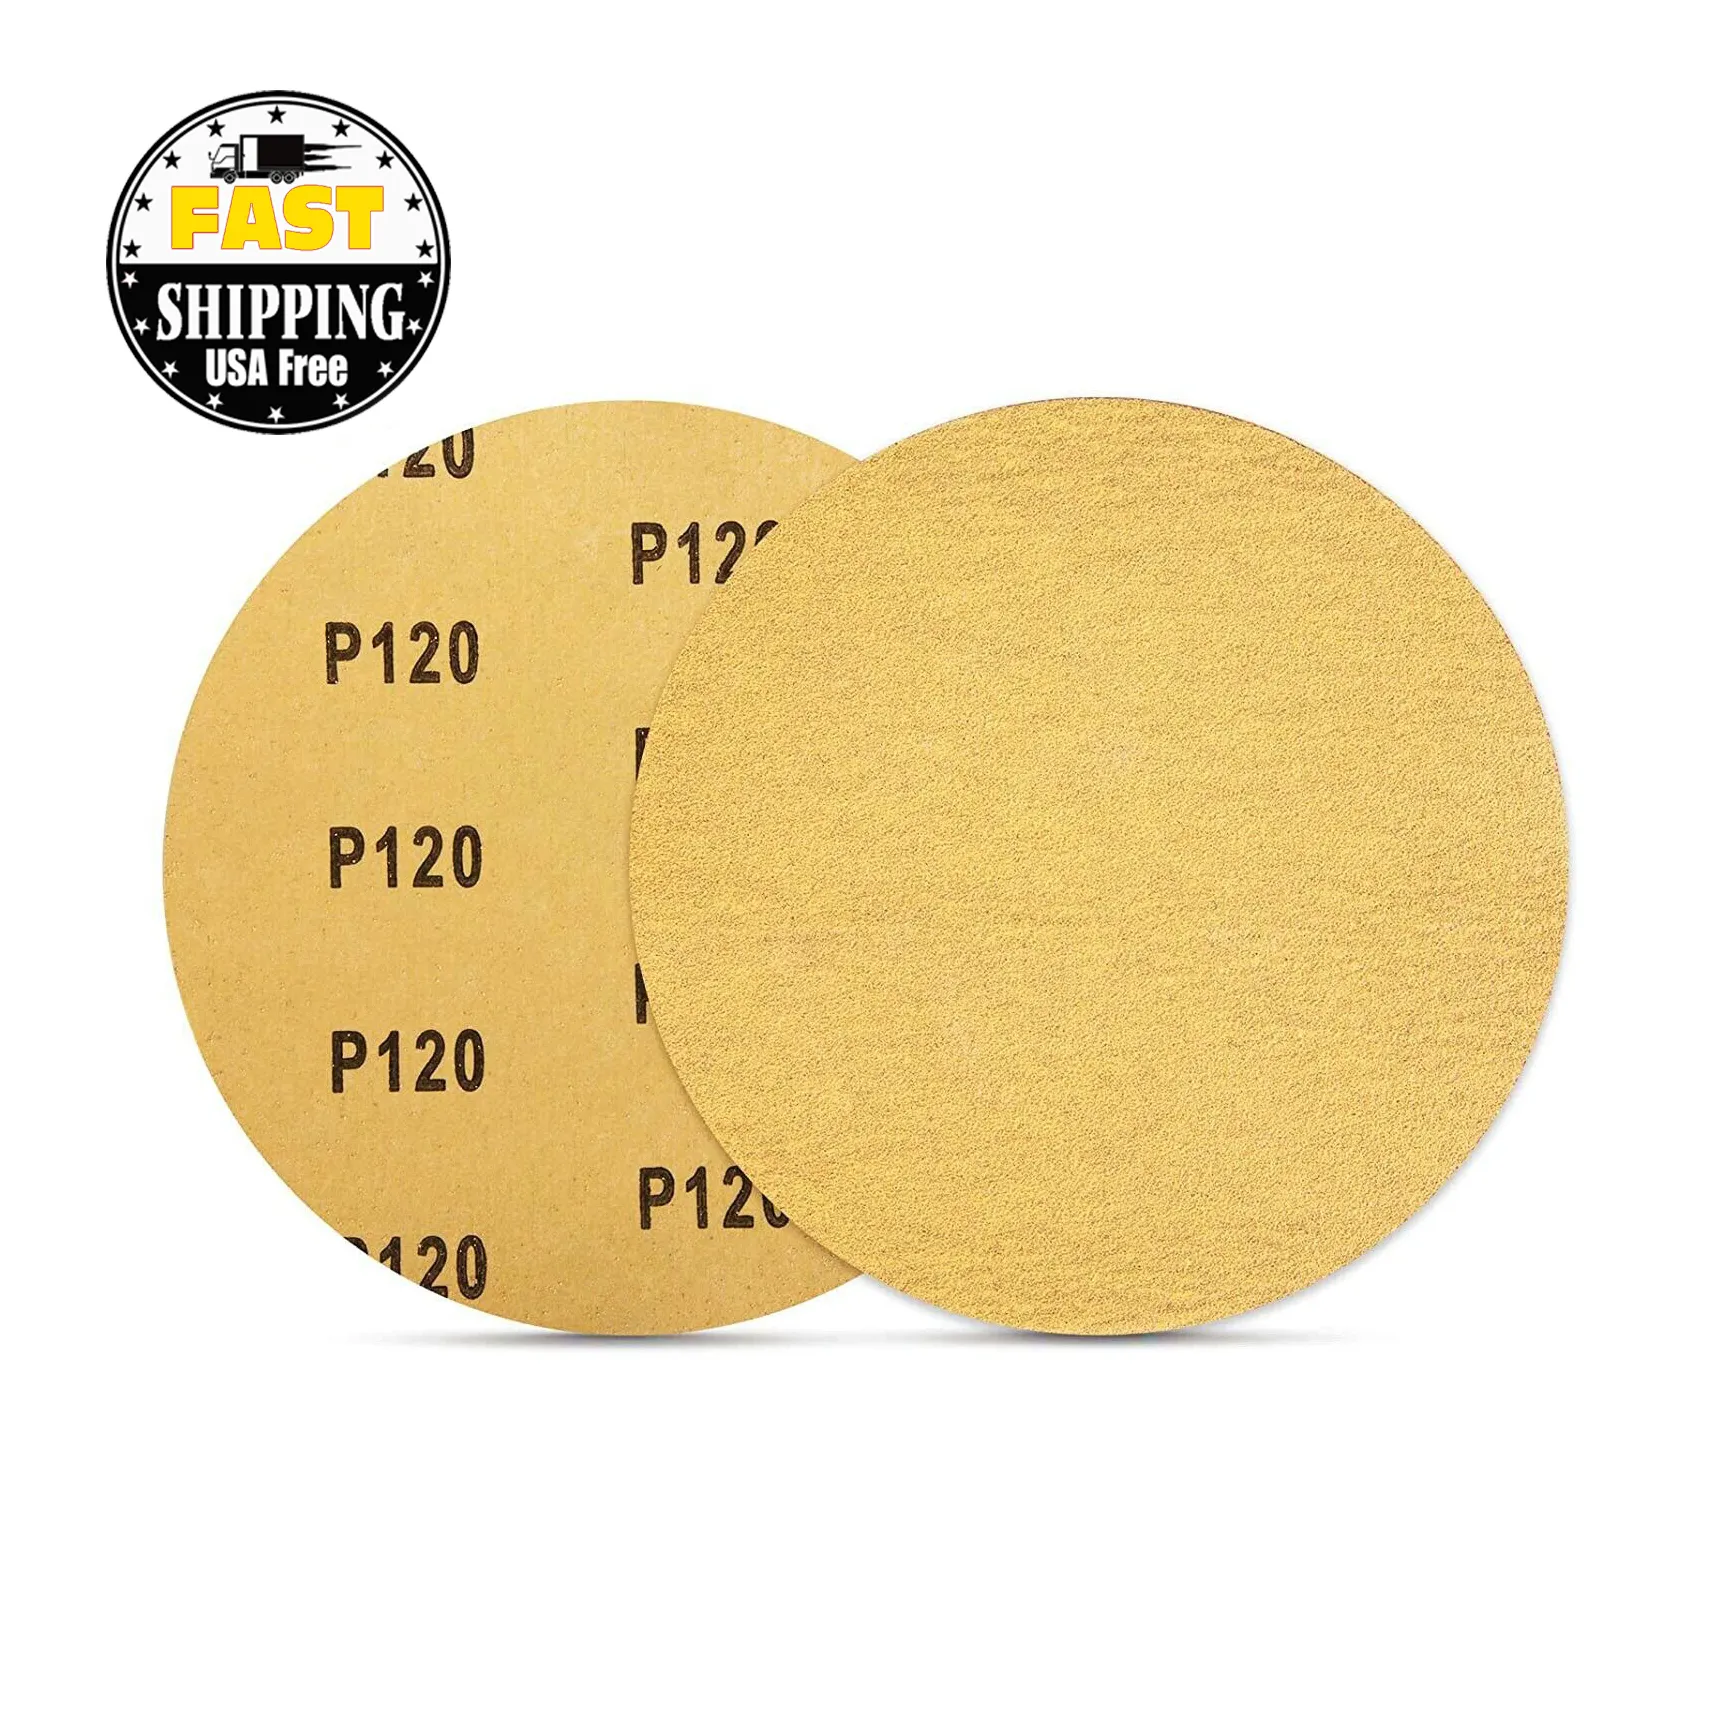 USA Warehouse Shipping Within 24h 6" Sticky Back Self Adhesive PSA Sanding Disc Roll  100PCS  120 Grit